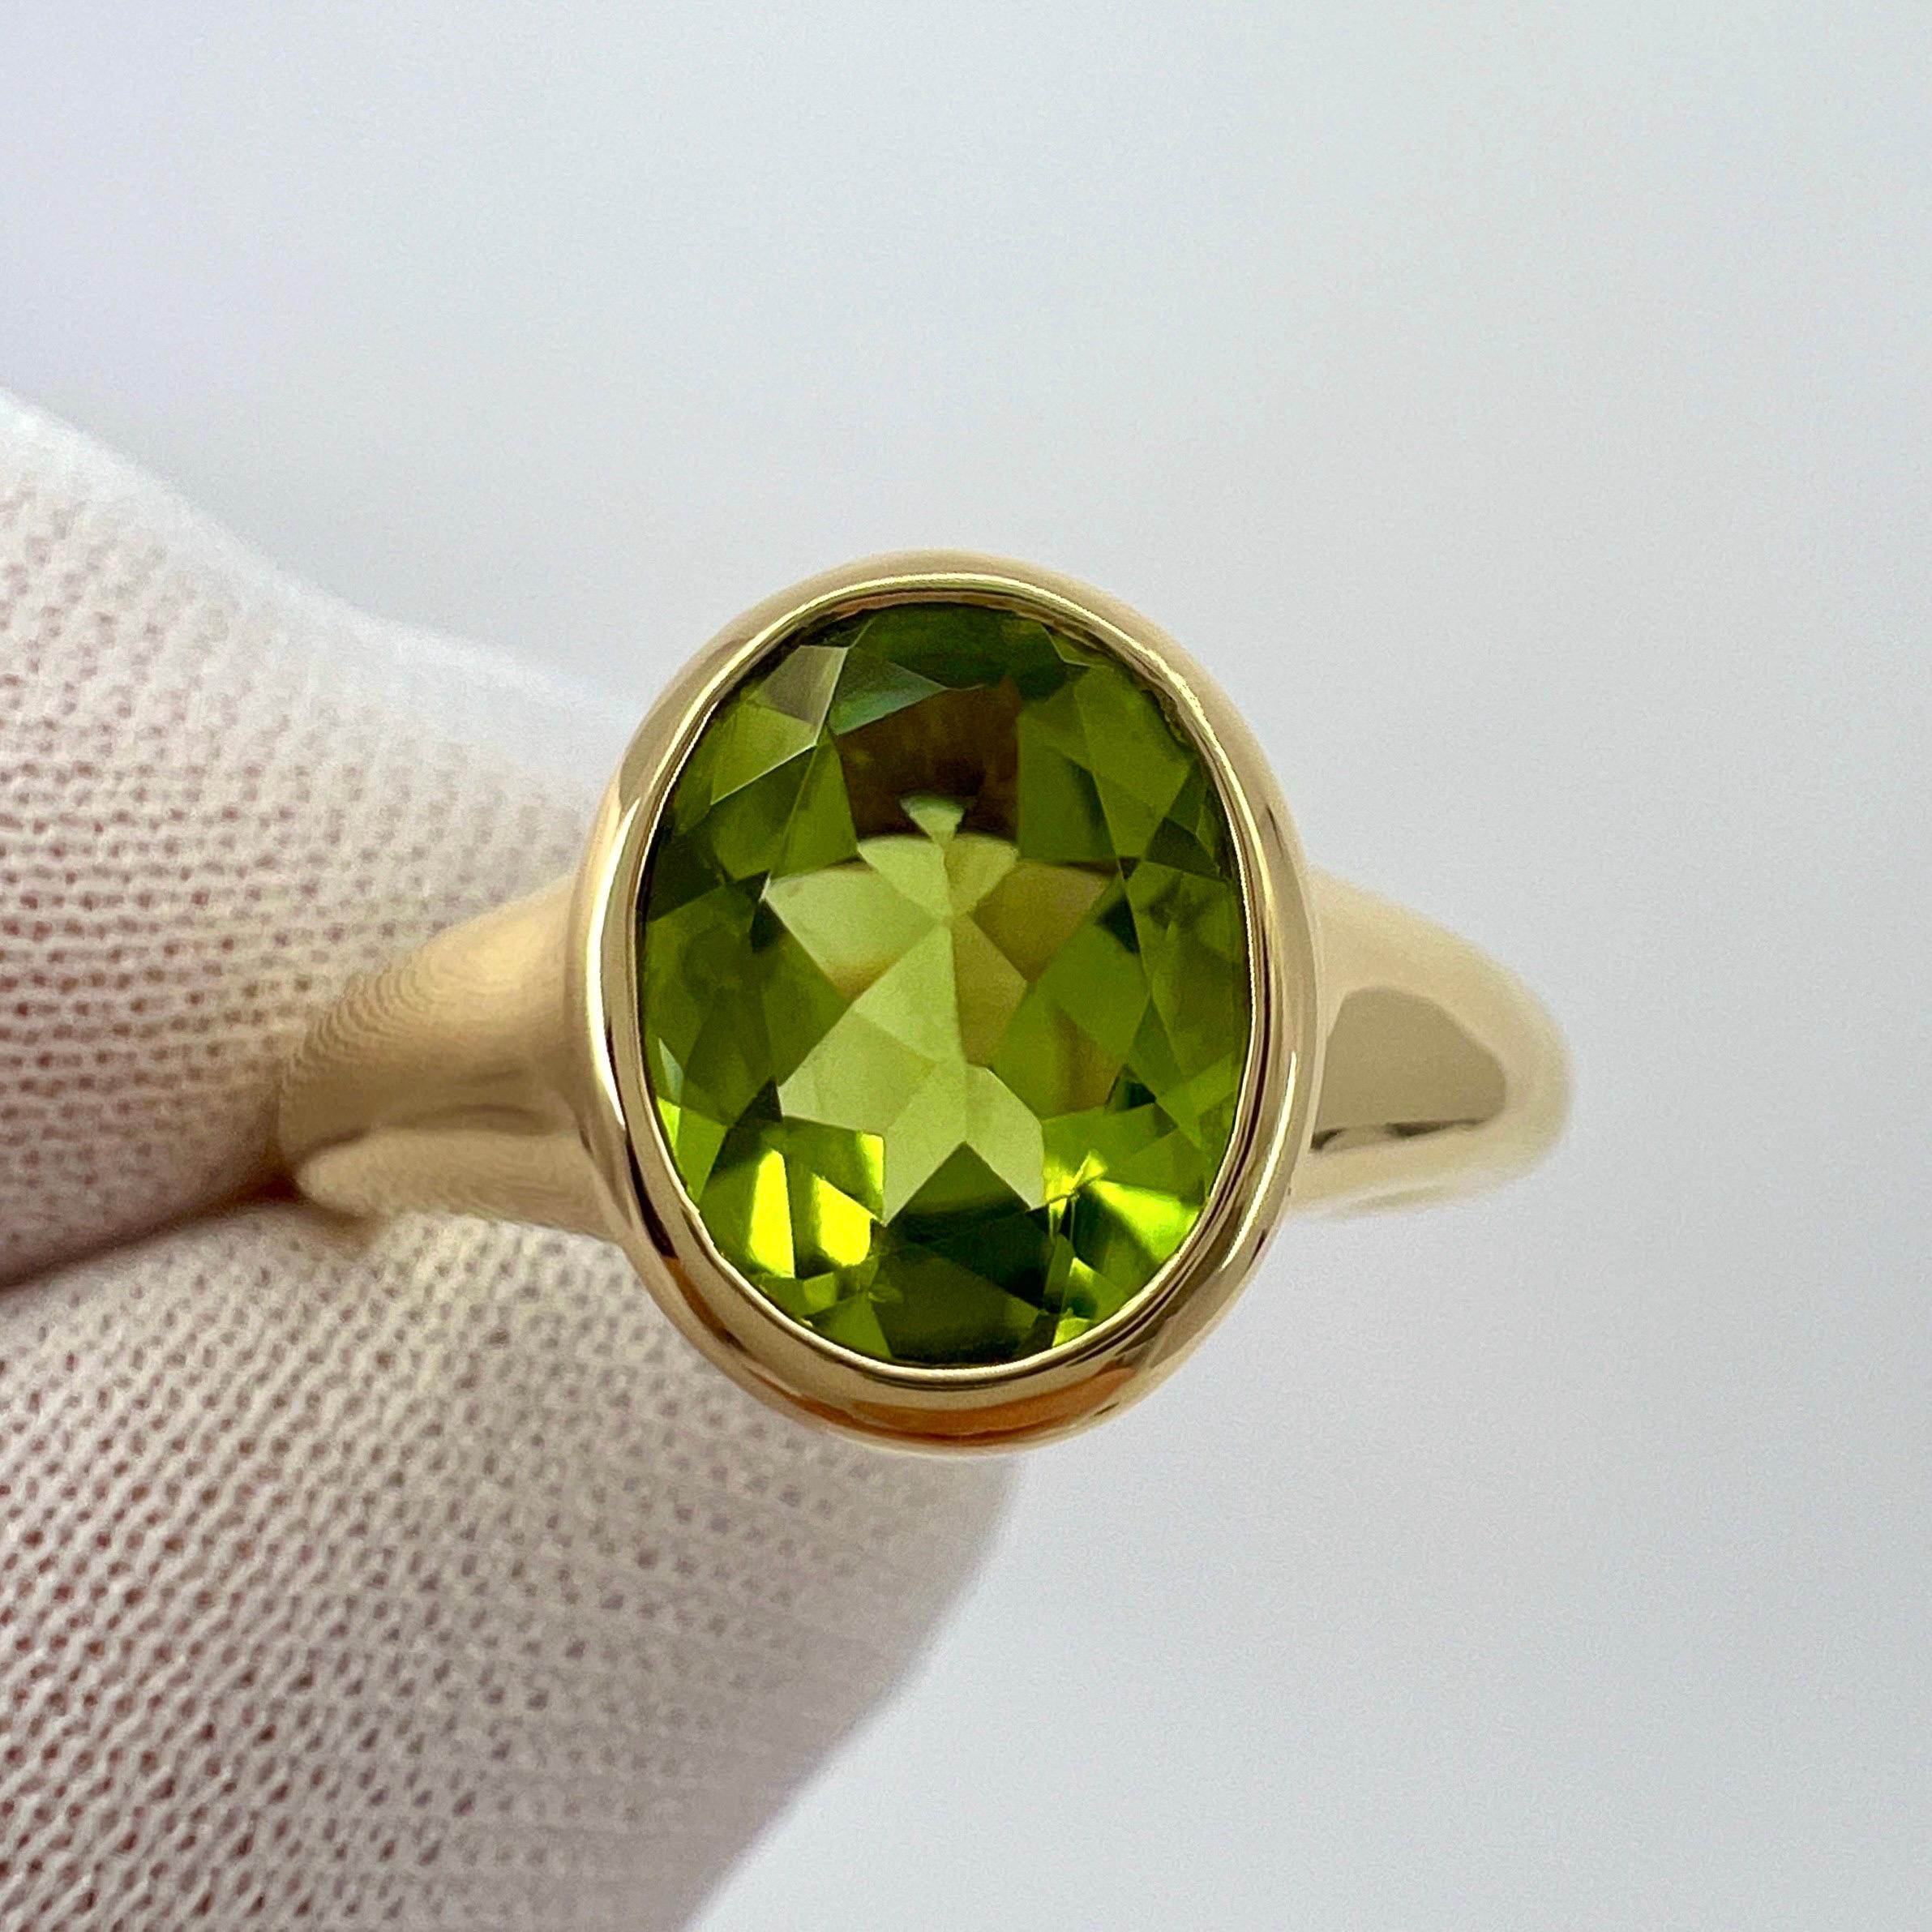 Rare Bvlgari Green Peridot Oval 18k Yellow Gold Signet Style Bezel Rubover Ring For Sale 1